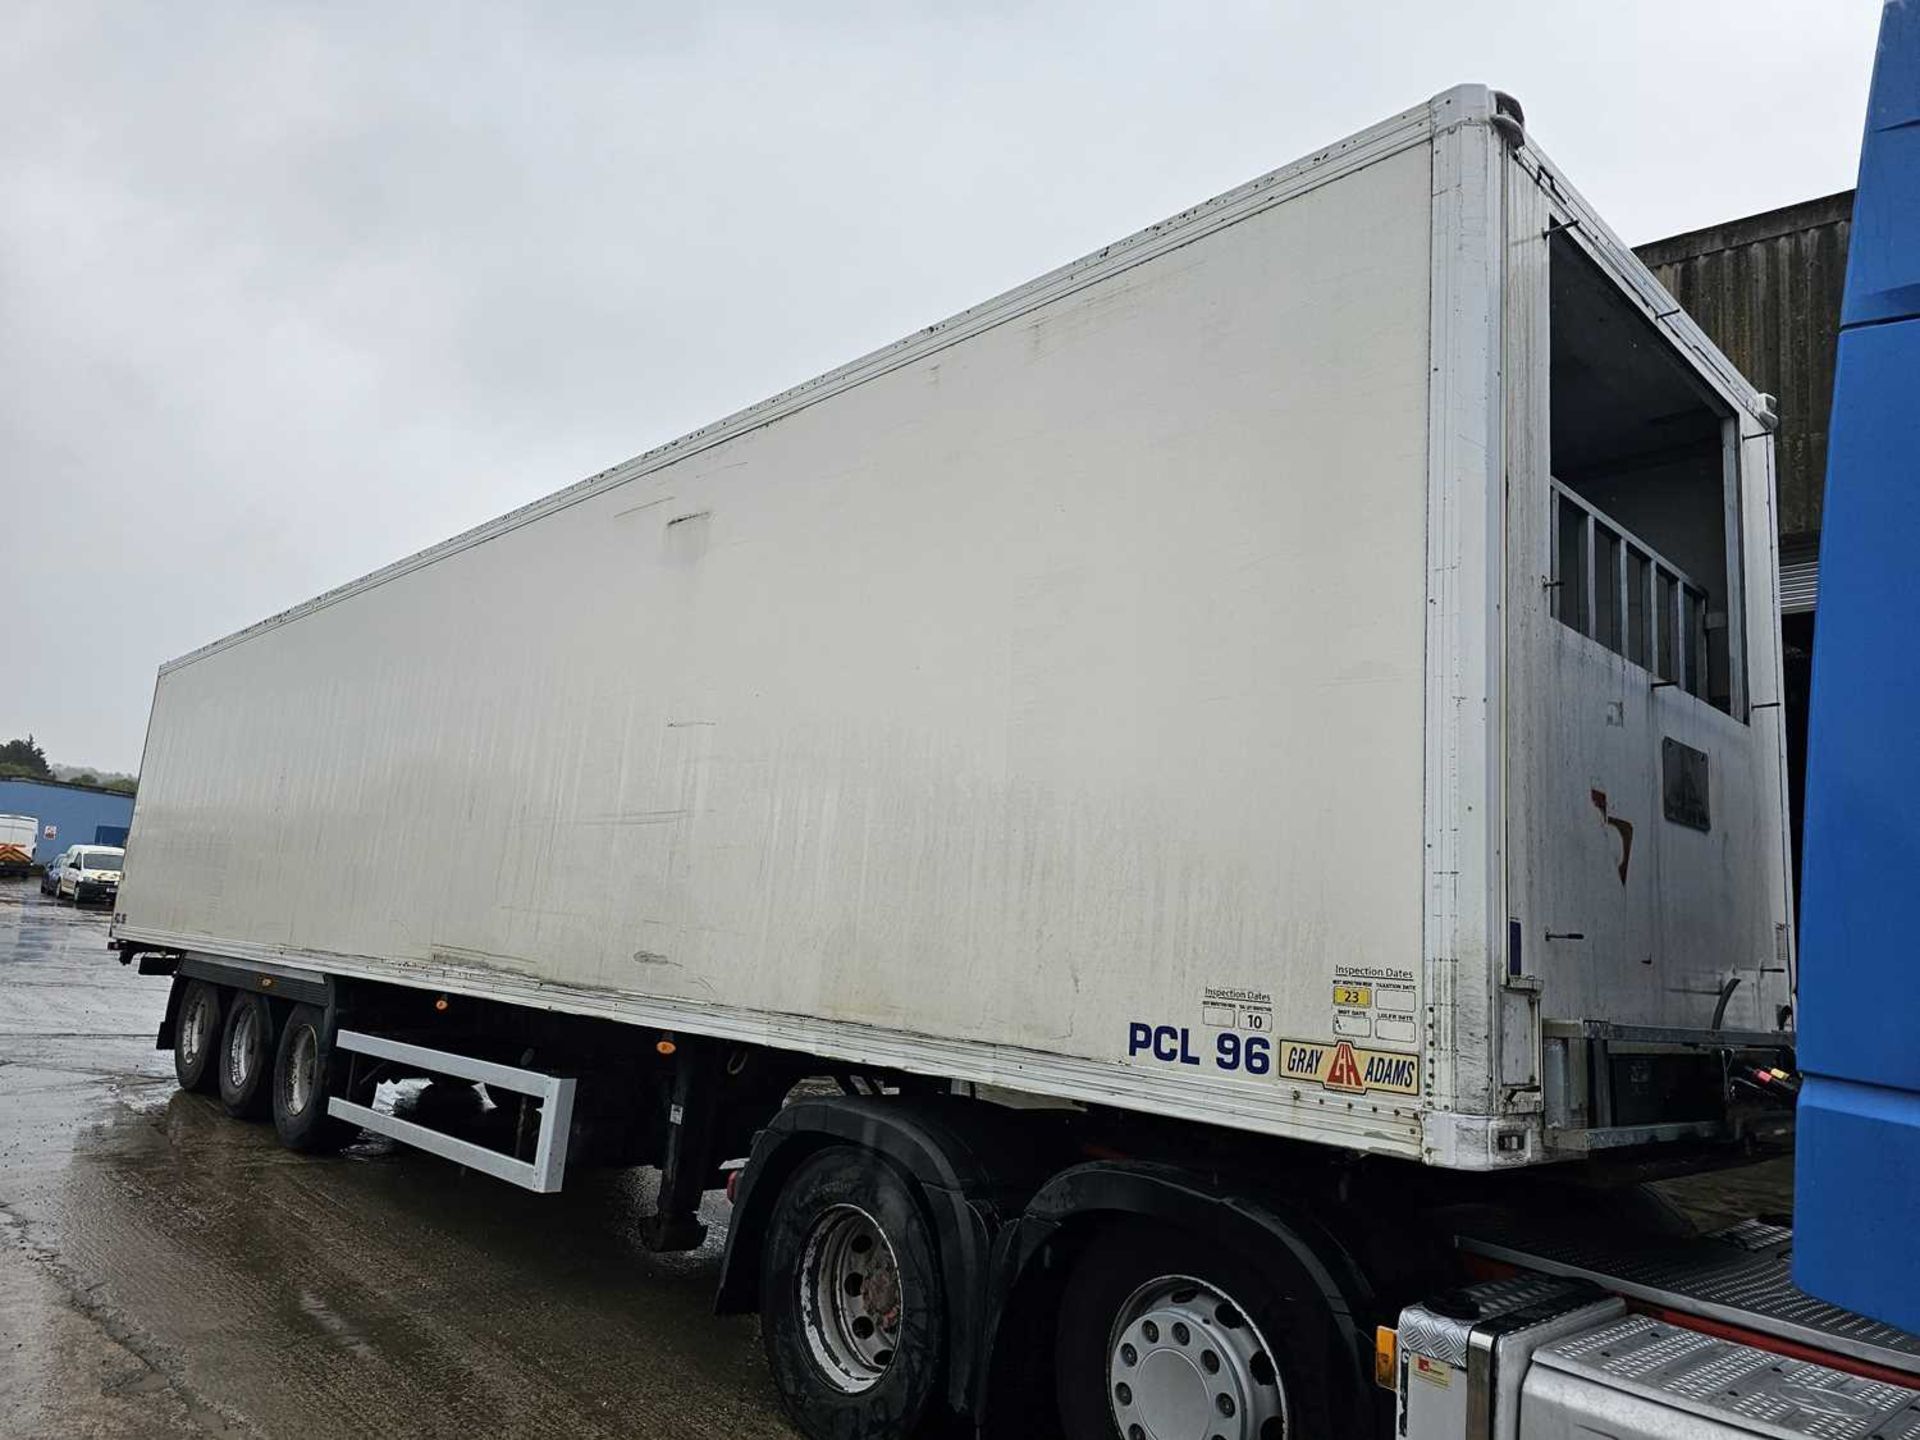 2010 Gray & Adams Tri Axle Refrigeration Trailer (No Fridge), (Plating Certificate Available) - Image 4 of 12